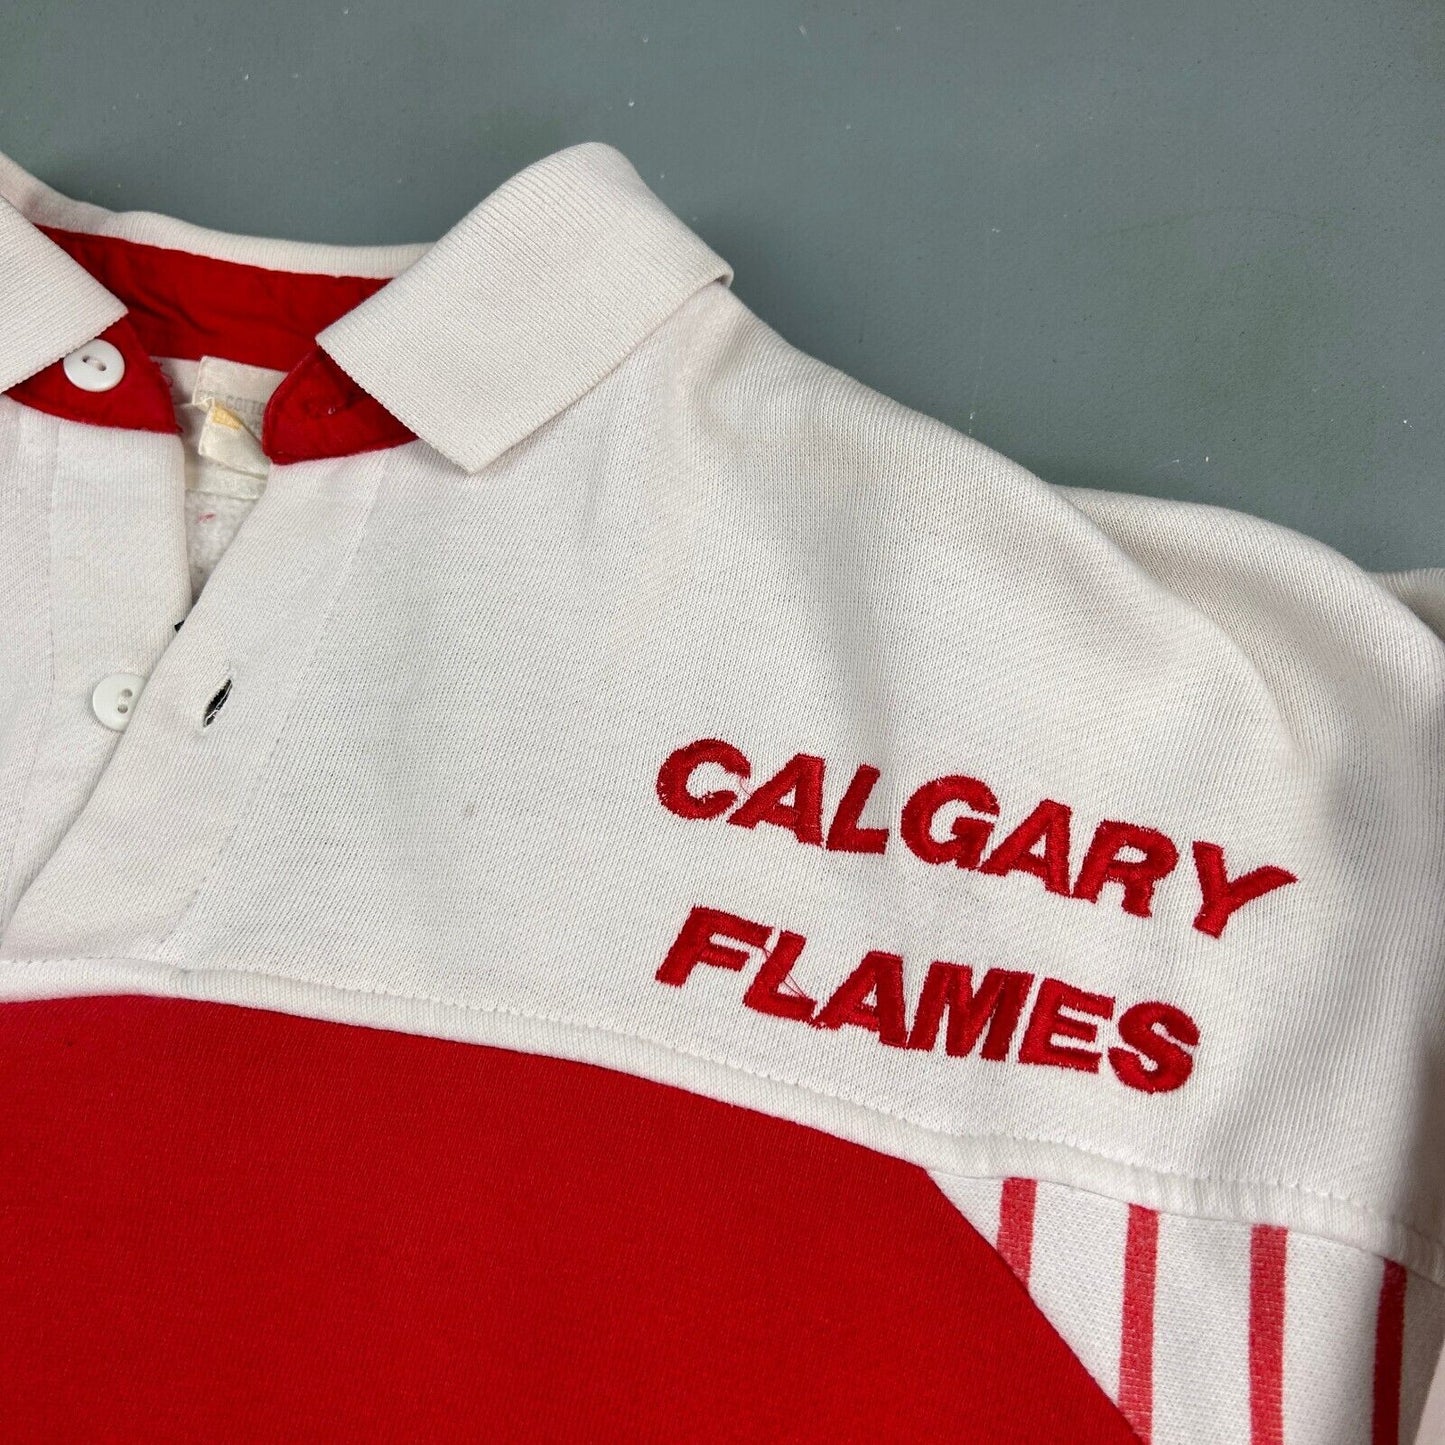 VINTAGE 90s NHL Calgary Flames Embroidered Collared Sweater sz Medium Adult